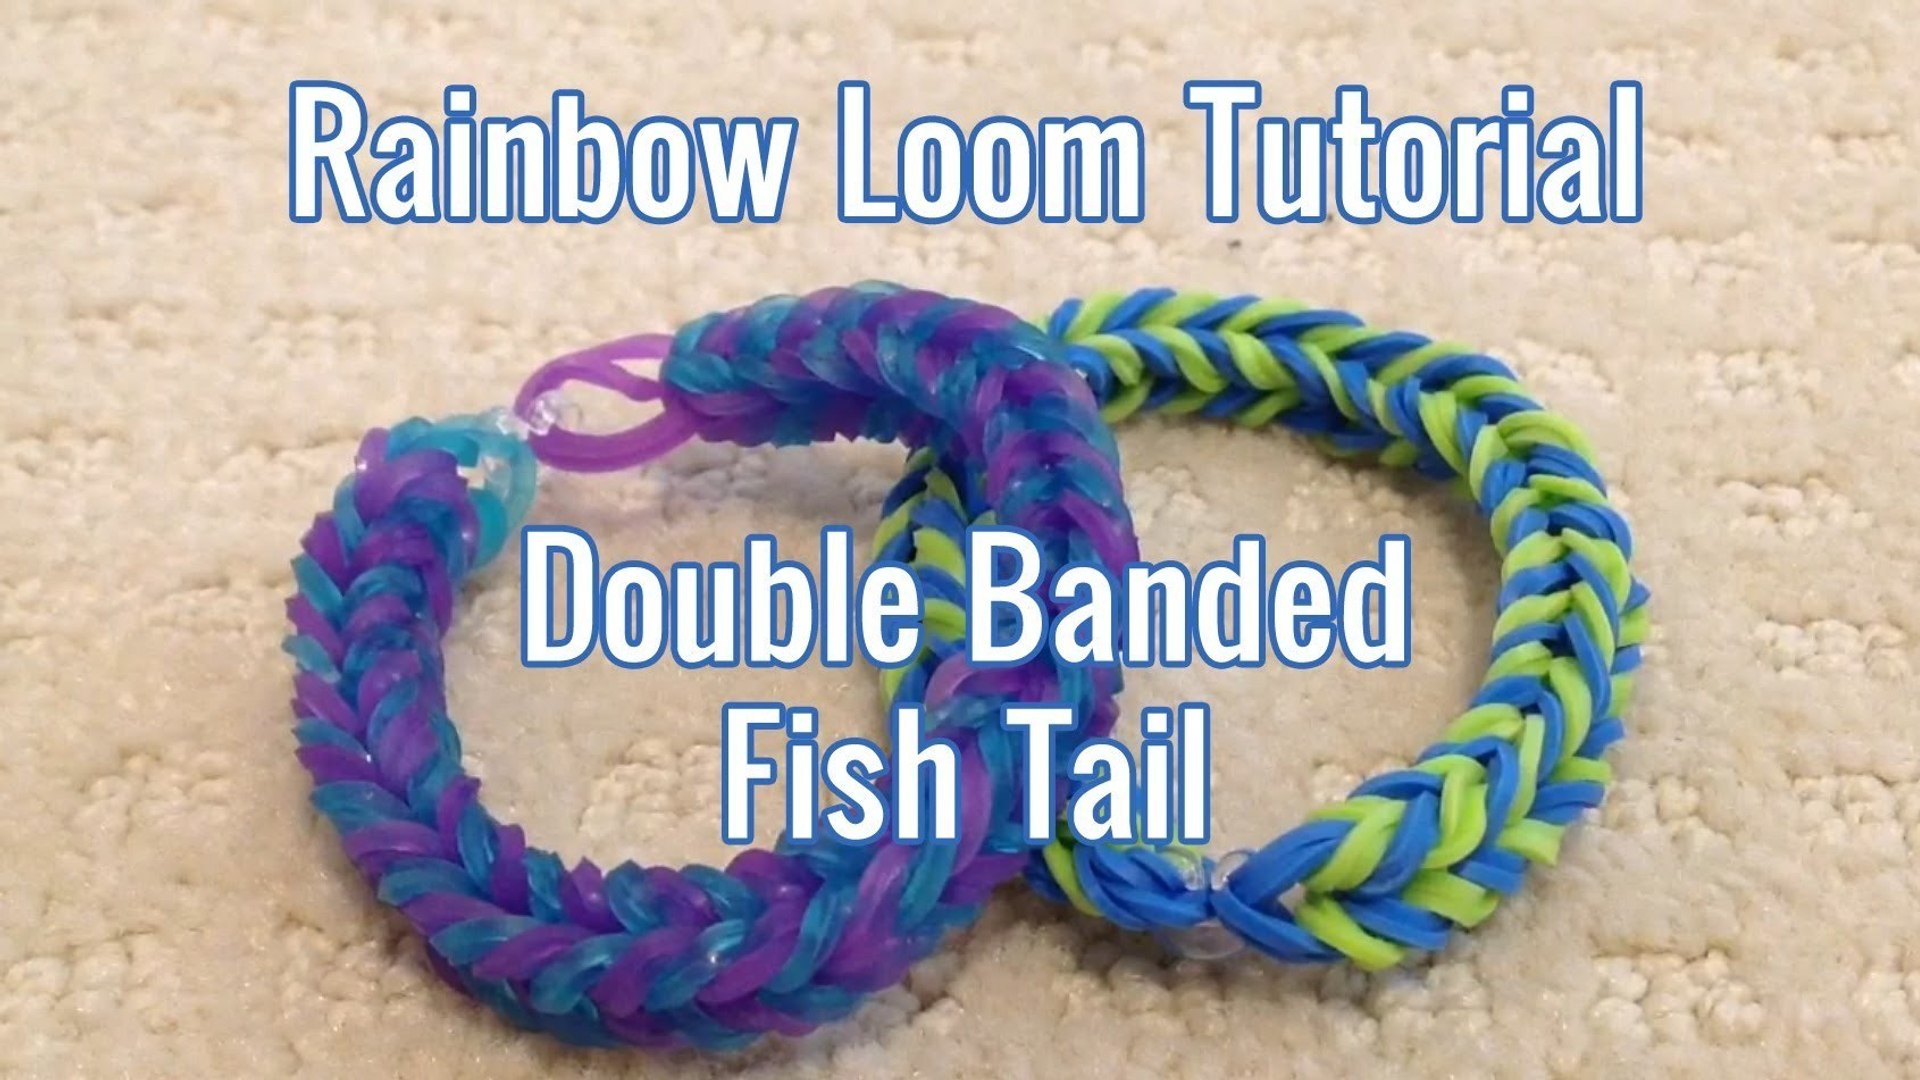 Rainbow Loom Tutorial - Double Banded Fishtail Bracelet - by Bethany G -  video Dailymotion